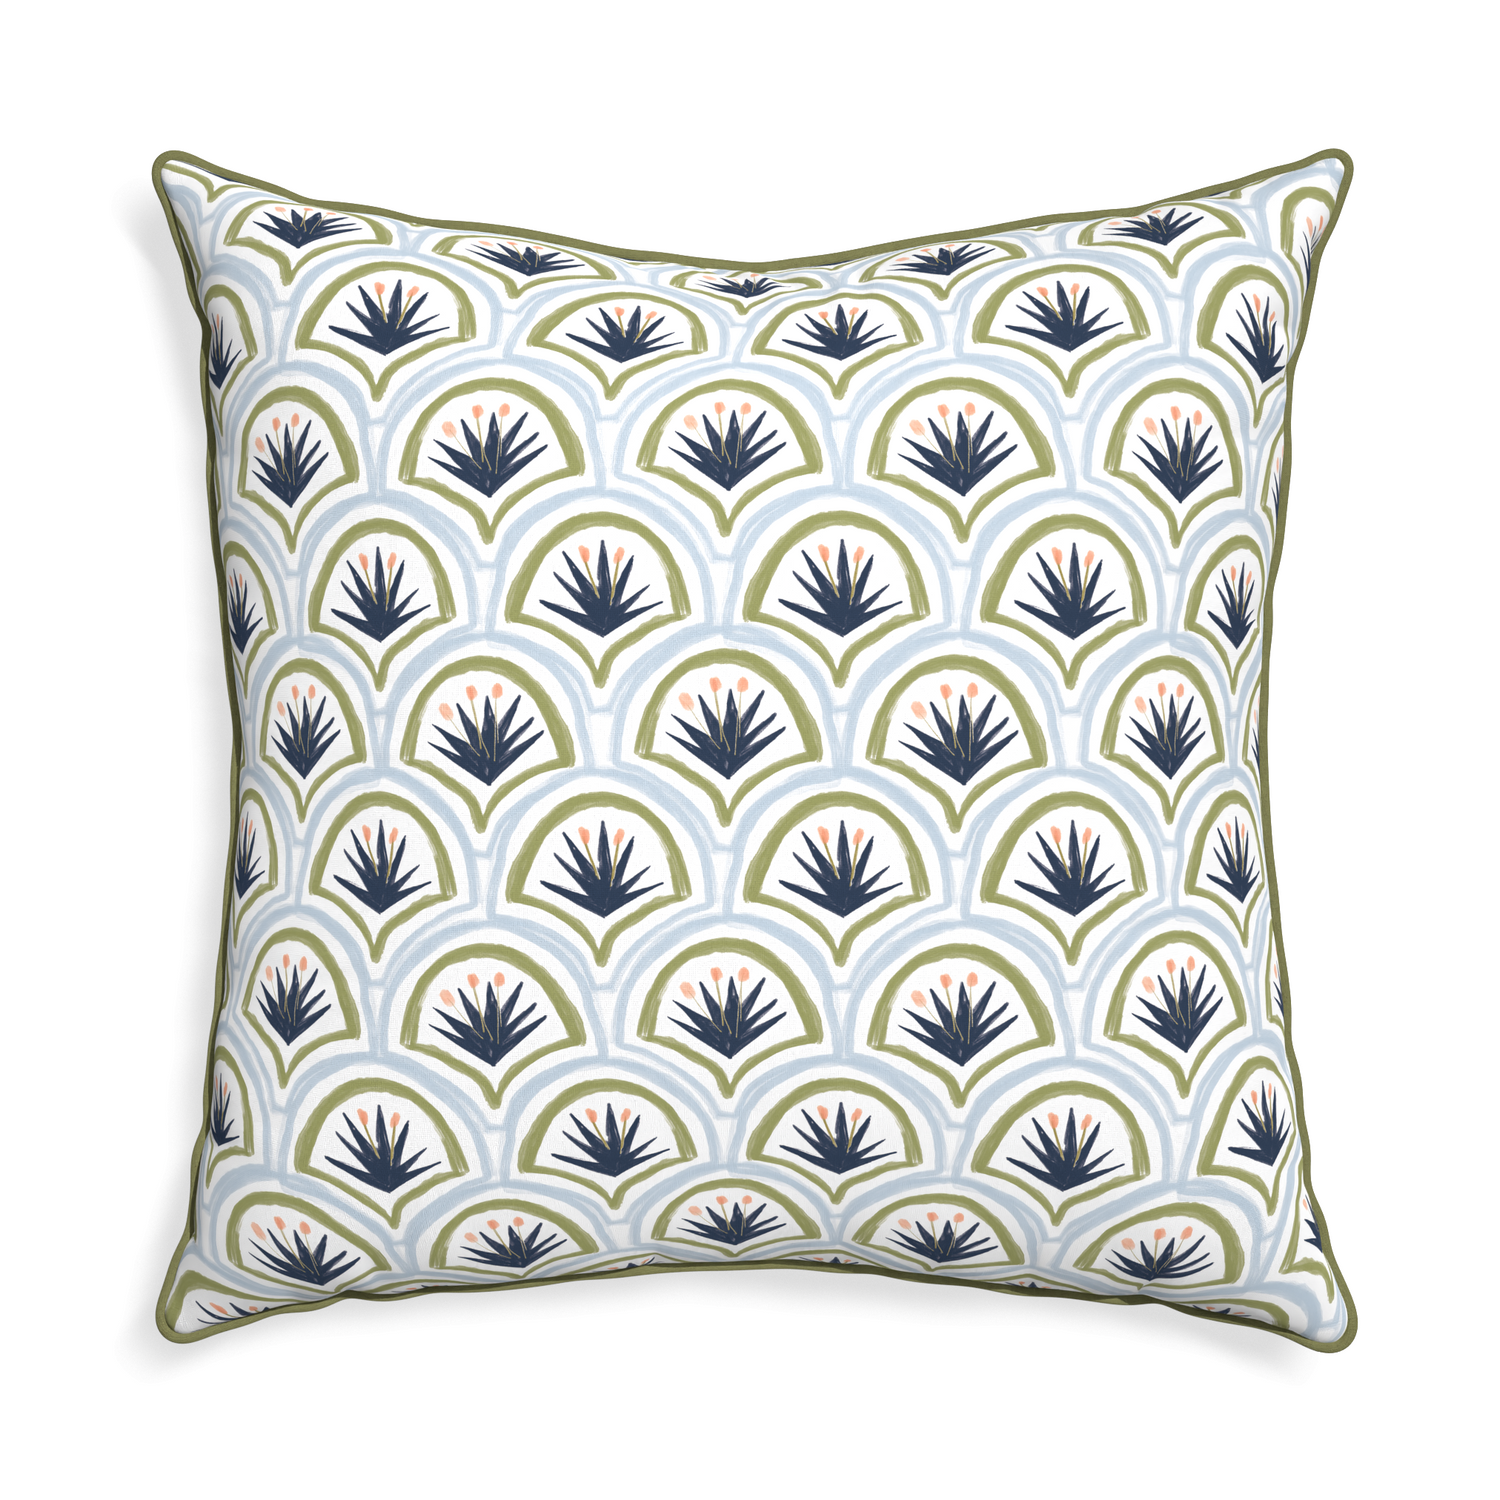 Euro-sham thatcher midnight custom art deco palm patternpillow with moss piping on white background